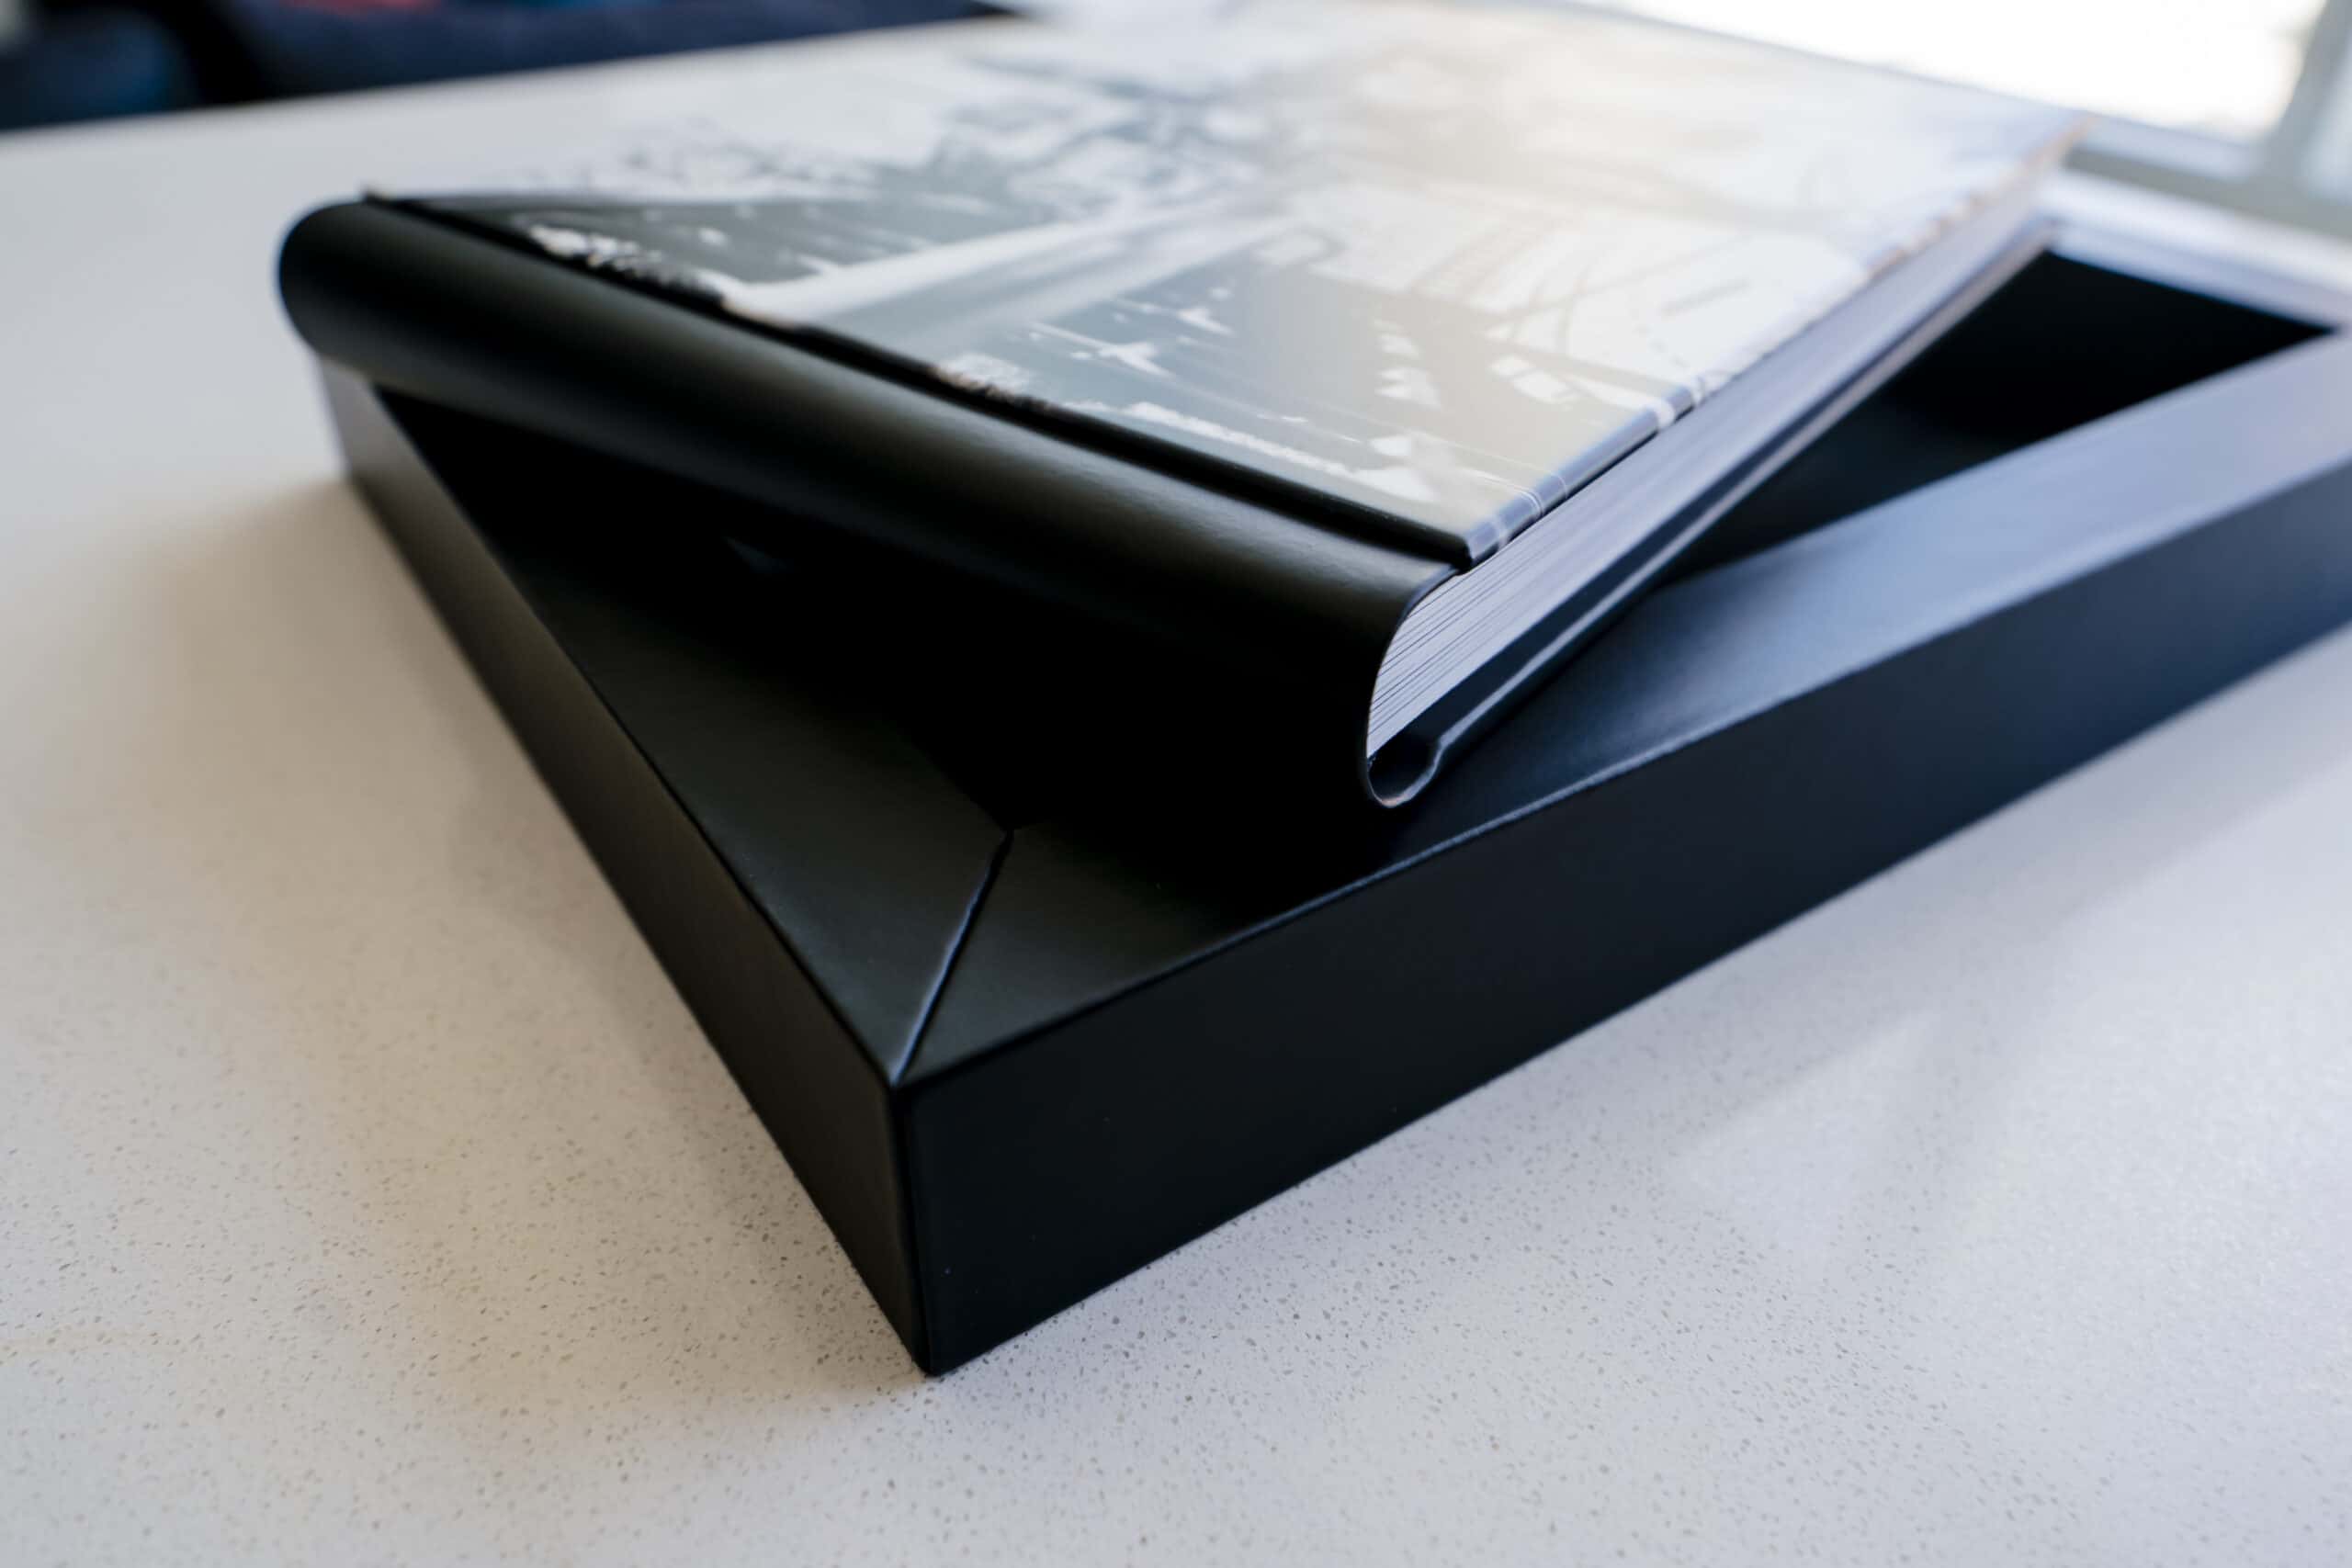 A black leather covered wedding album with a black and white picture of a bride and groom at Kansas City's Country Club Plaza on the cover. 